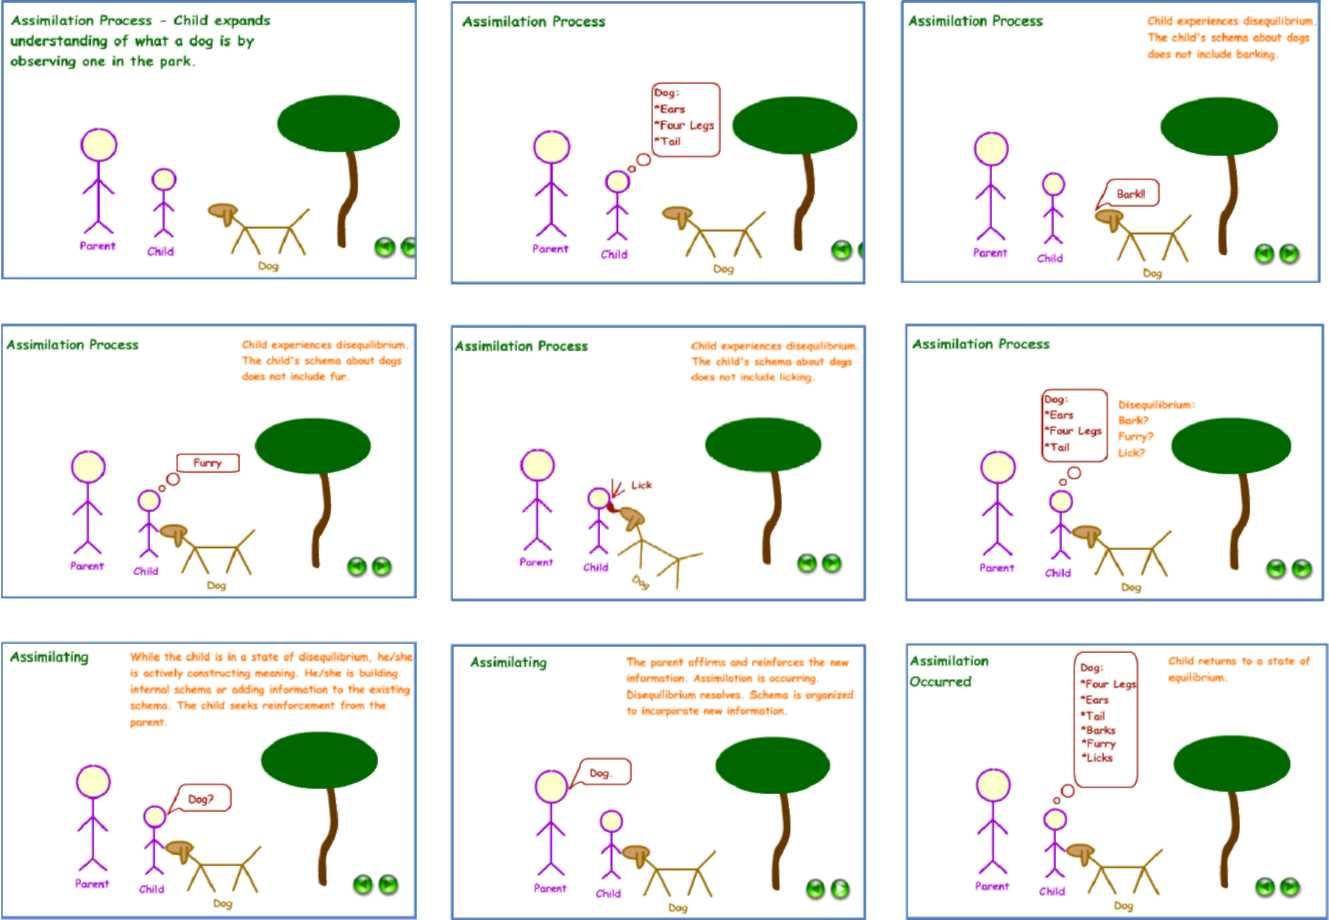 A comic explaining the assimilation process in a child. The child processes new information about a dog, such as "barks" and "lick", and assimilates it in the dog schema.